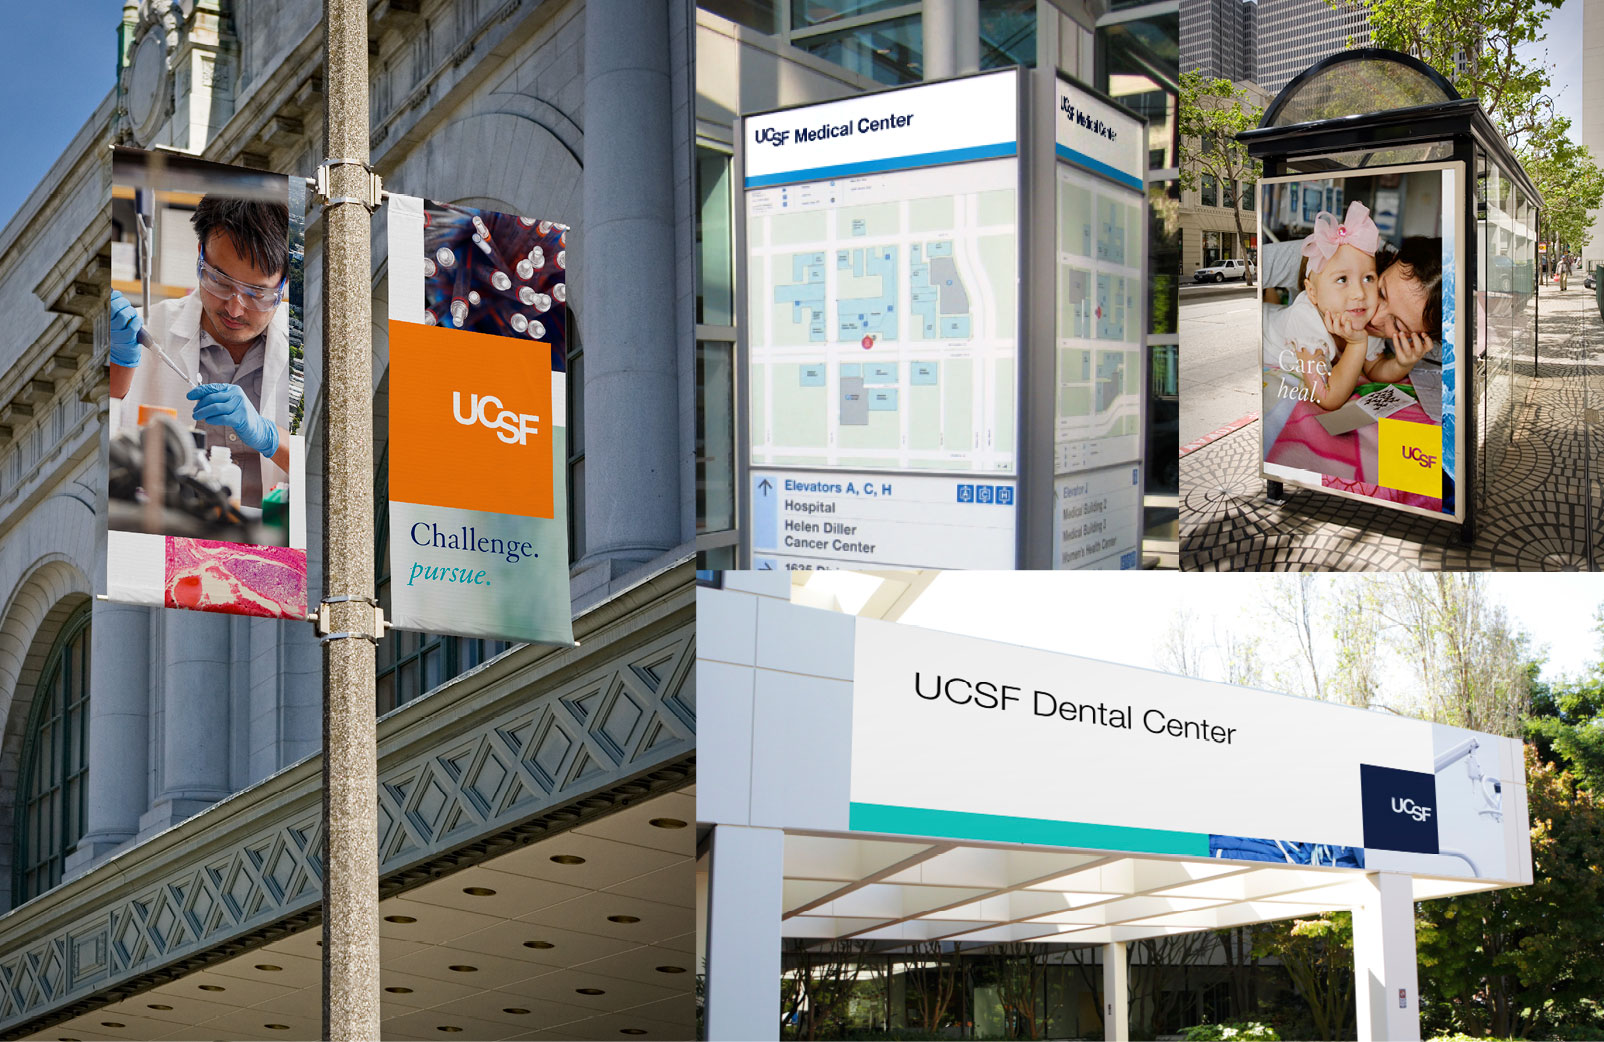 UCSF signage on light poles and bus shelters